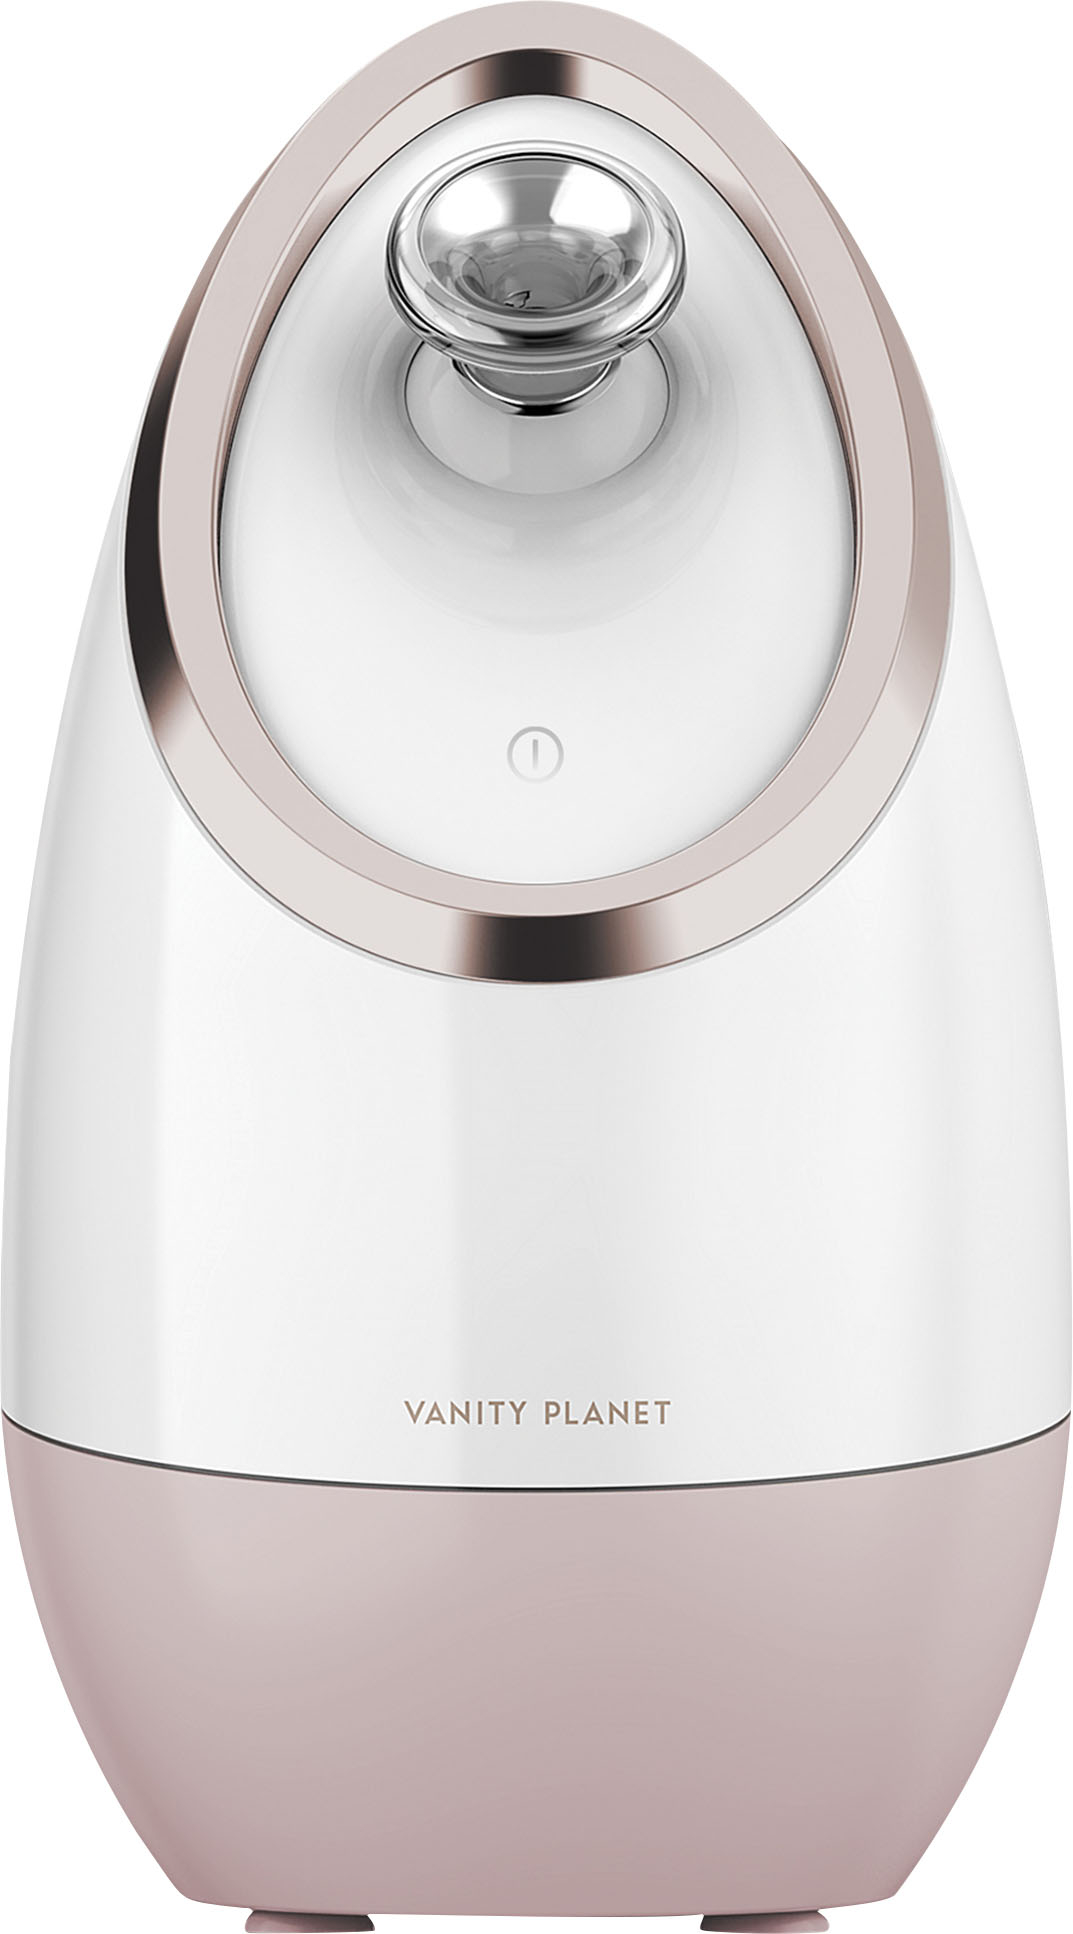 Angle View: Vanity Planet - Facial Steamer - White